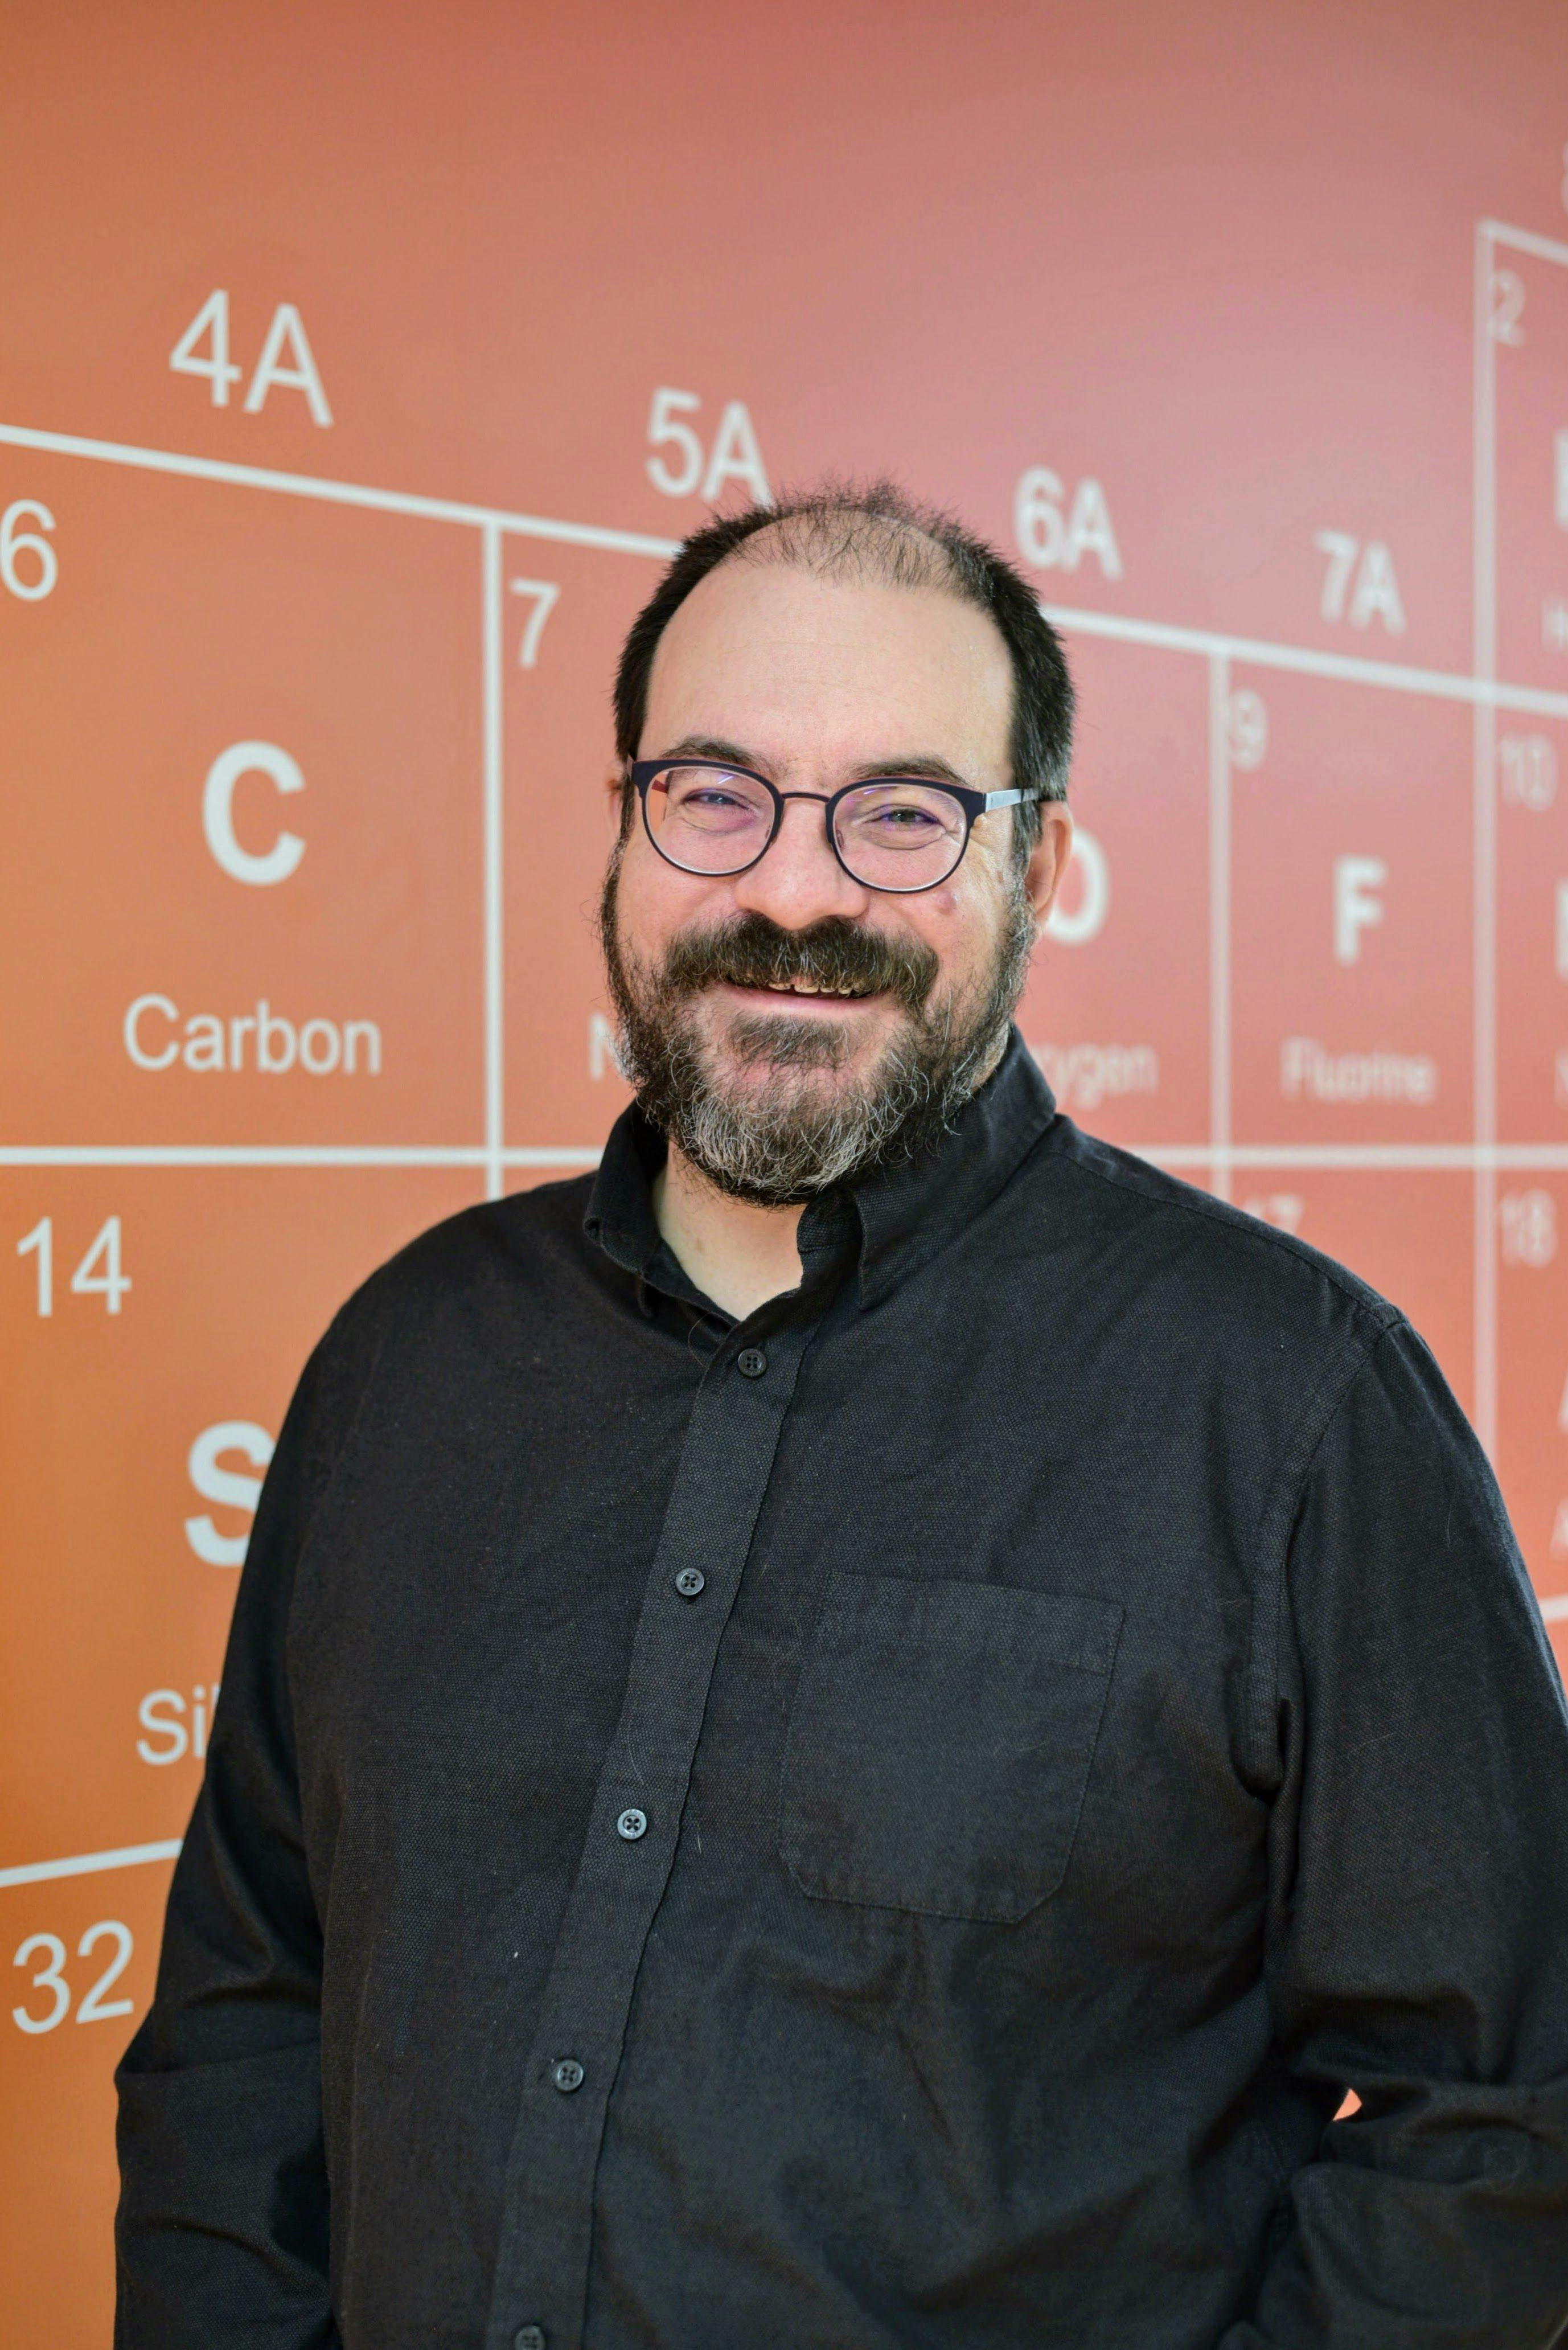 James Harynuk is a Professor of Chemistry at the University of Alberta and one of the Node Leaders for The Metabolomics Innovation Centre (TMIC). His research focuses on the development of new tools for processing GC×GC data and the application of GC×GC for a variety of applications in food, metabolomics, and more recently environmental analysis.